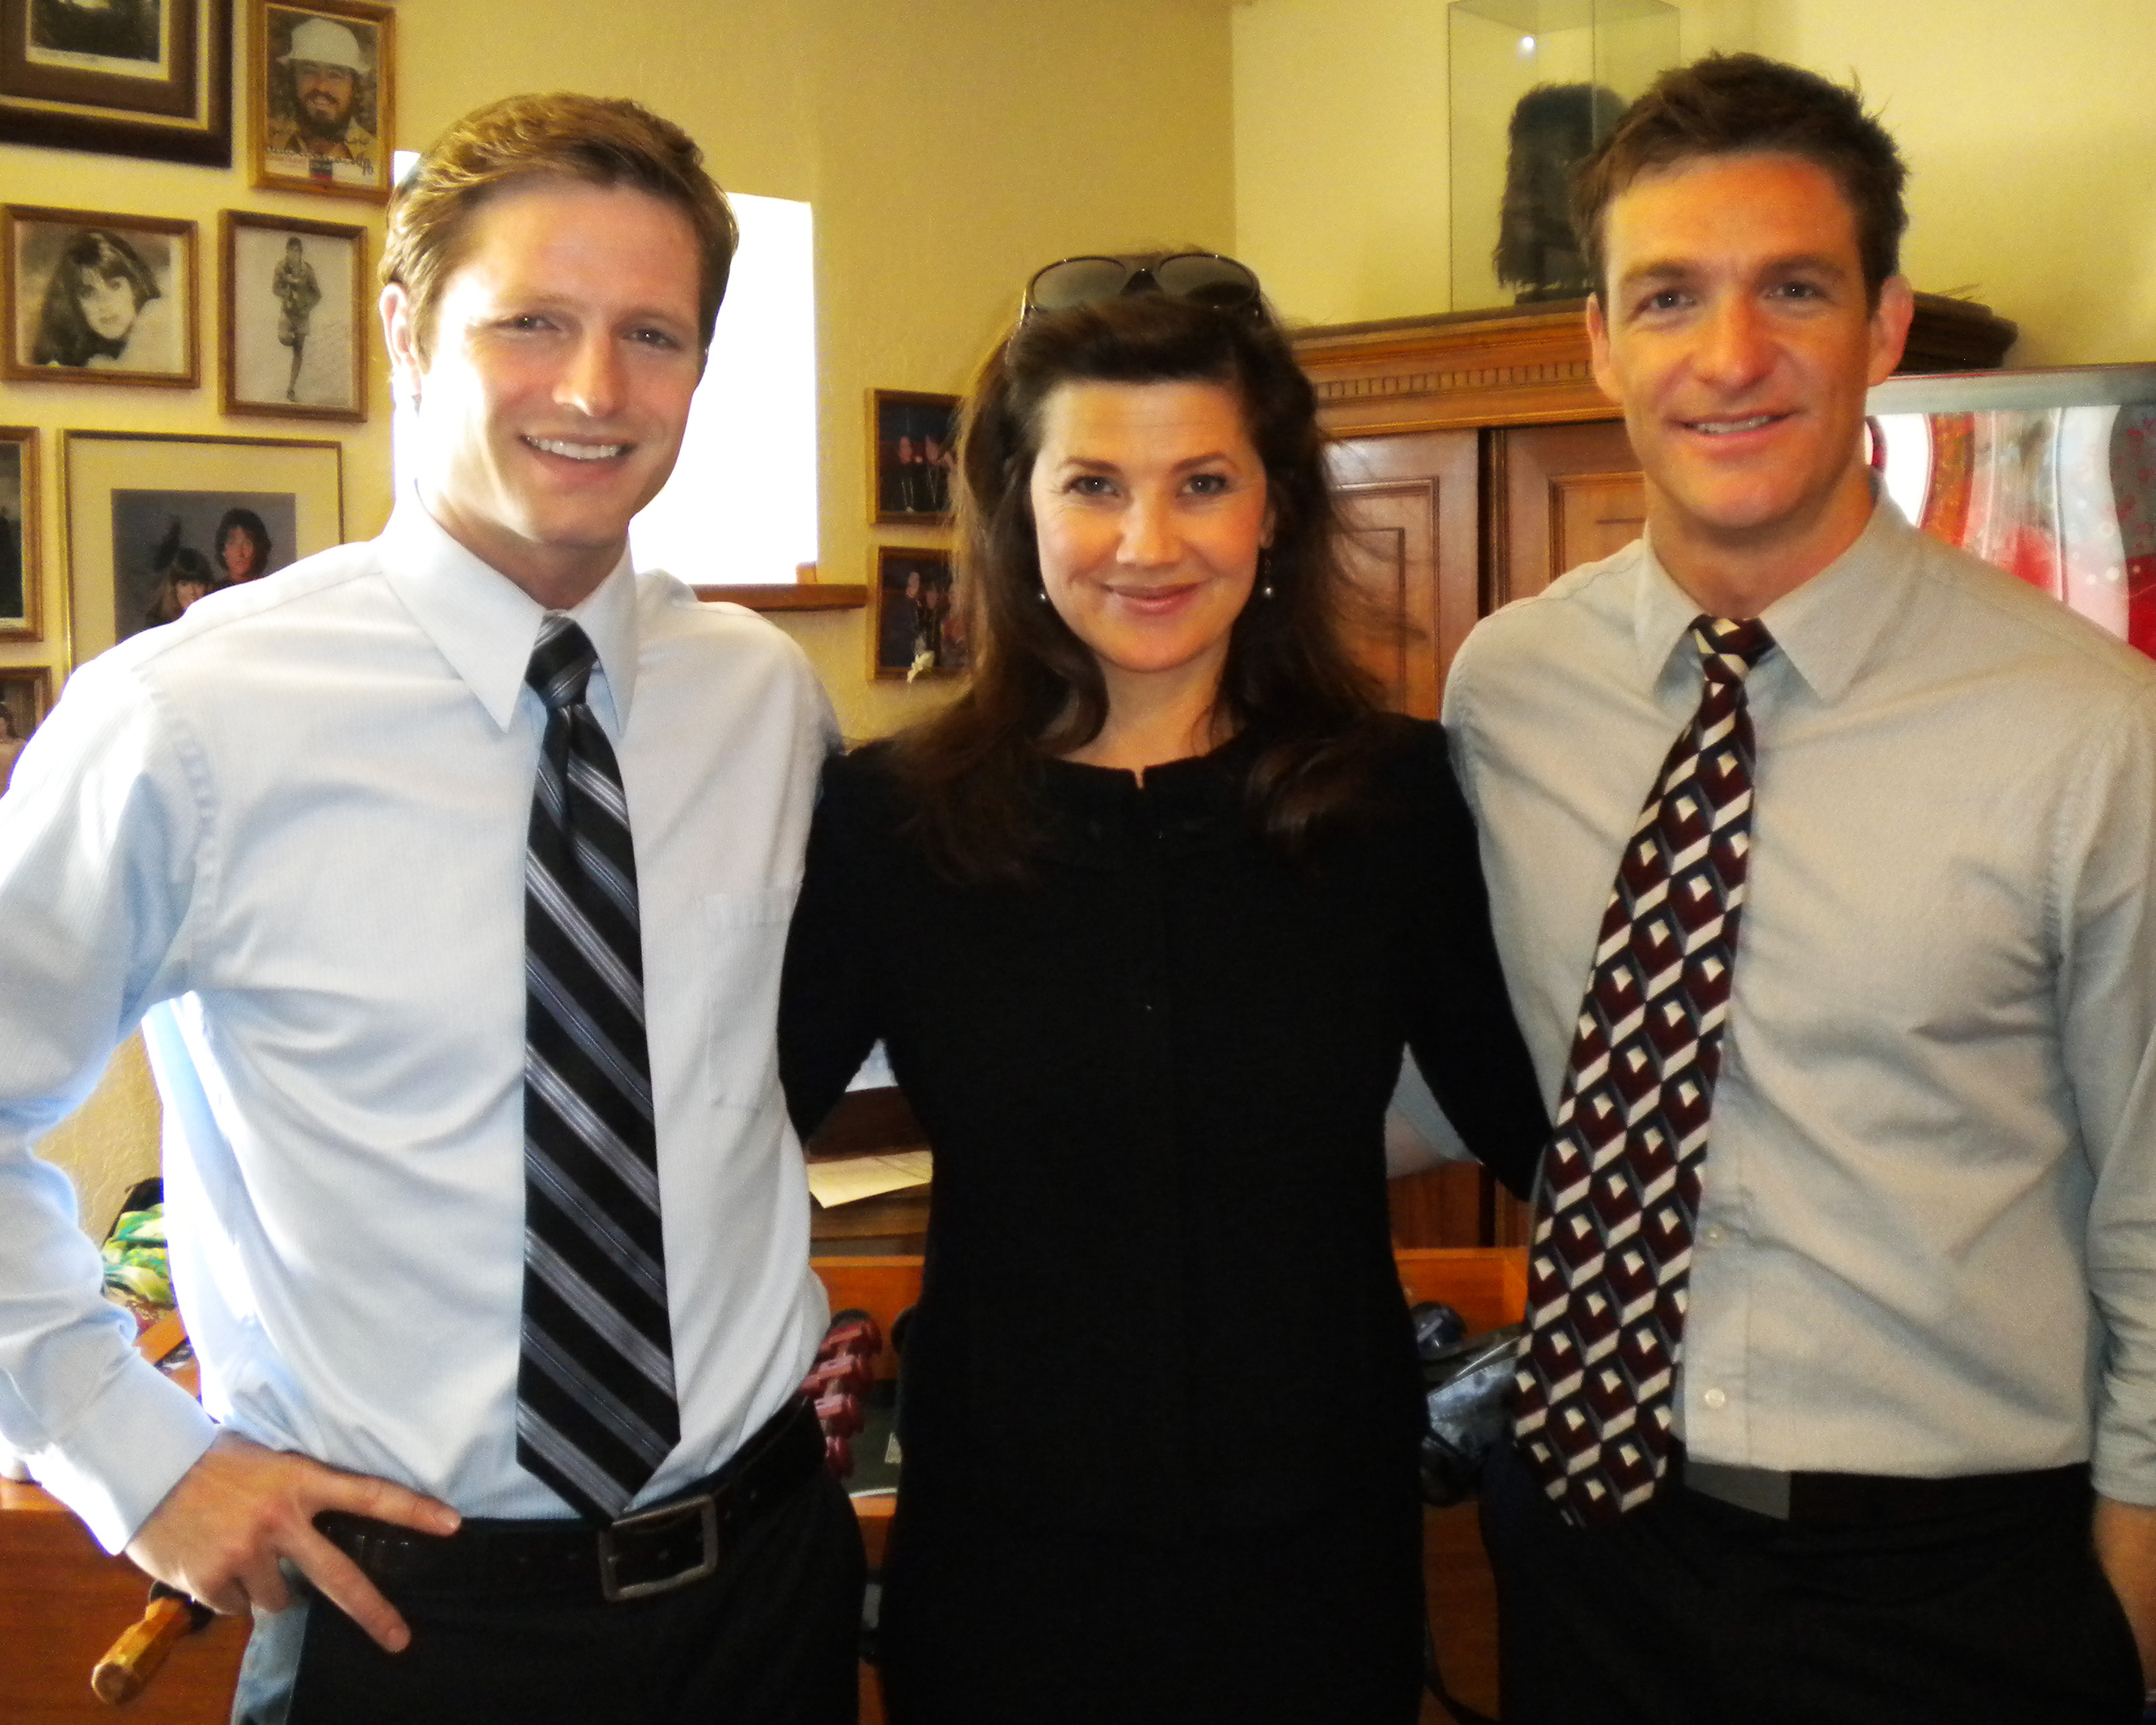 On set of Changing Hearts with Daphne Zuniga and Brad Johnson